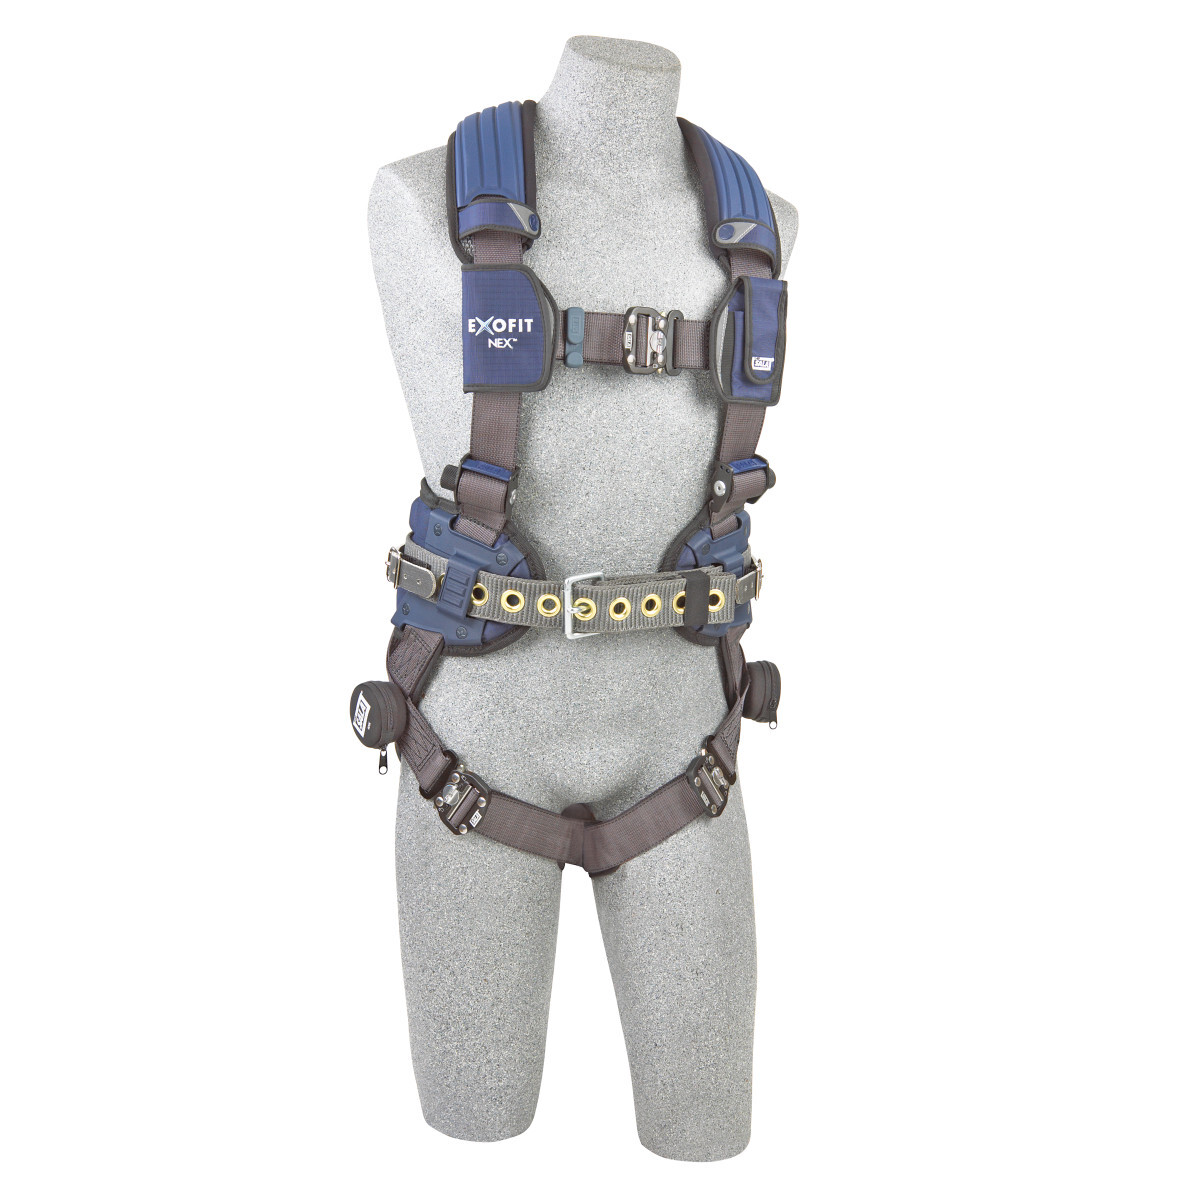 3M™ DBI-SALA® Medium ExoFit NEX™ Full Body/Vest Style Harness With Tech-Lite™ Aluminum Back D-Ring, Miner'S Belt With Pad And Si